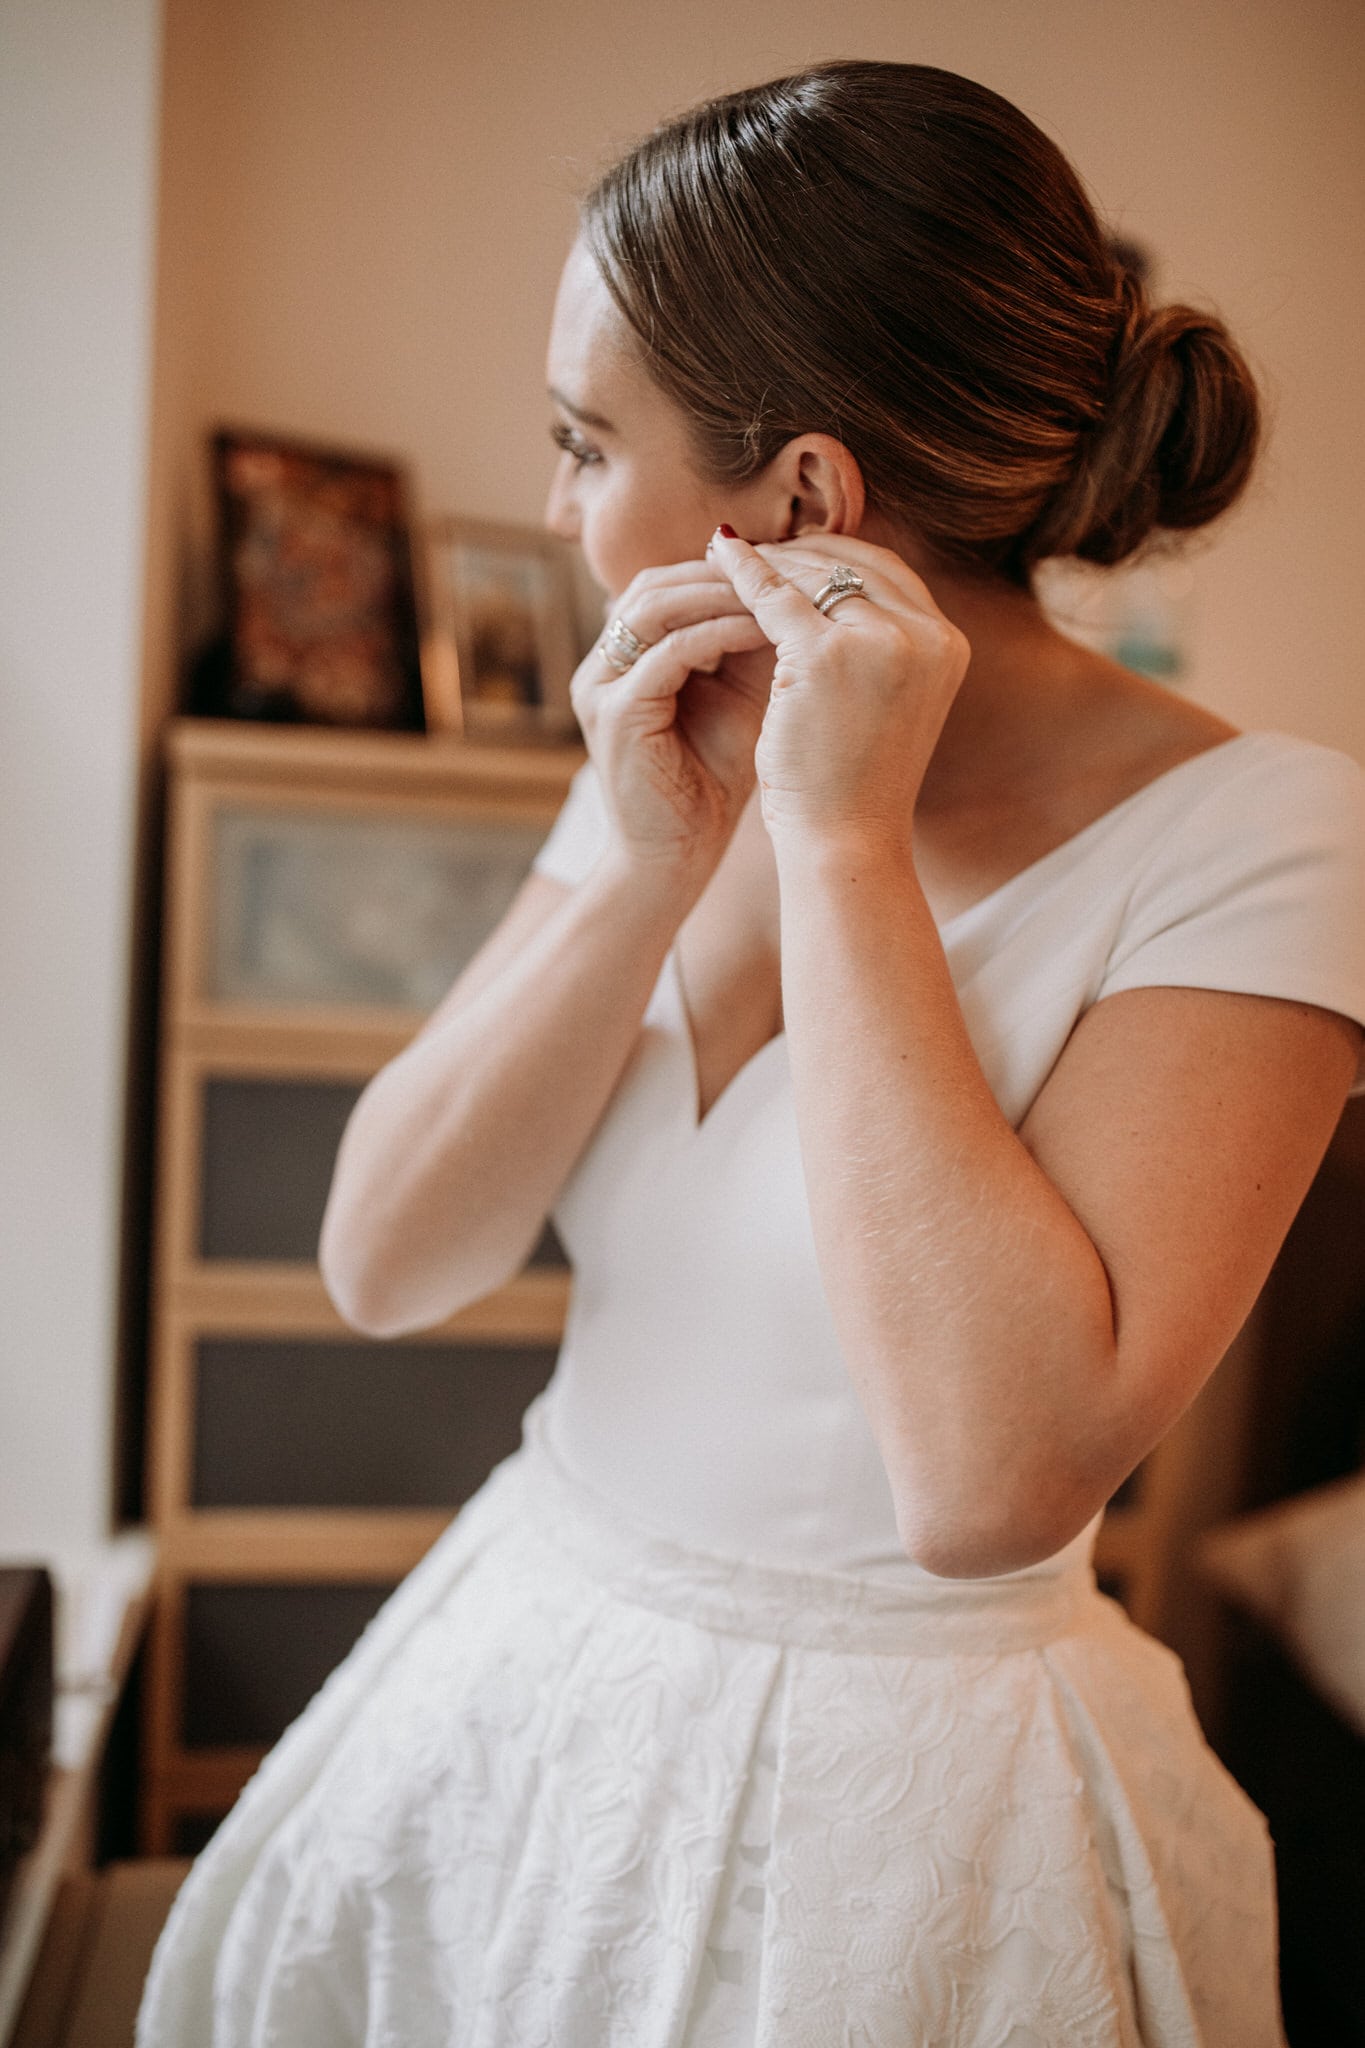 The bride puts on her earrings. Wedding Photographer Brent Calis.